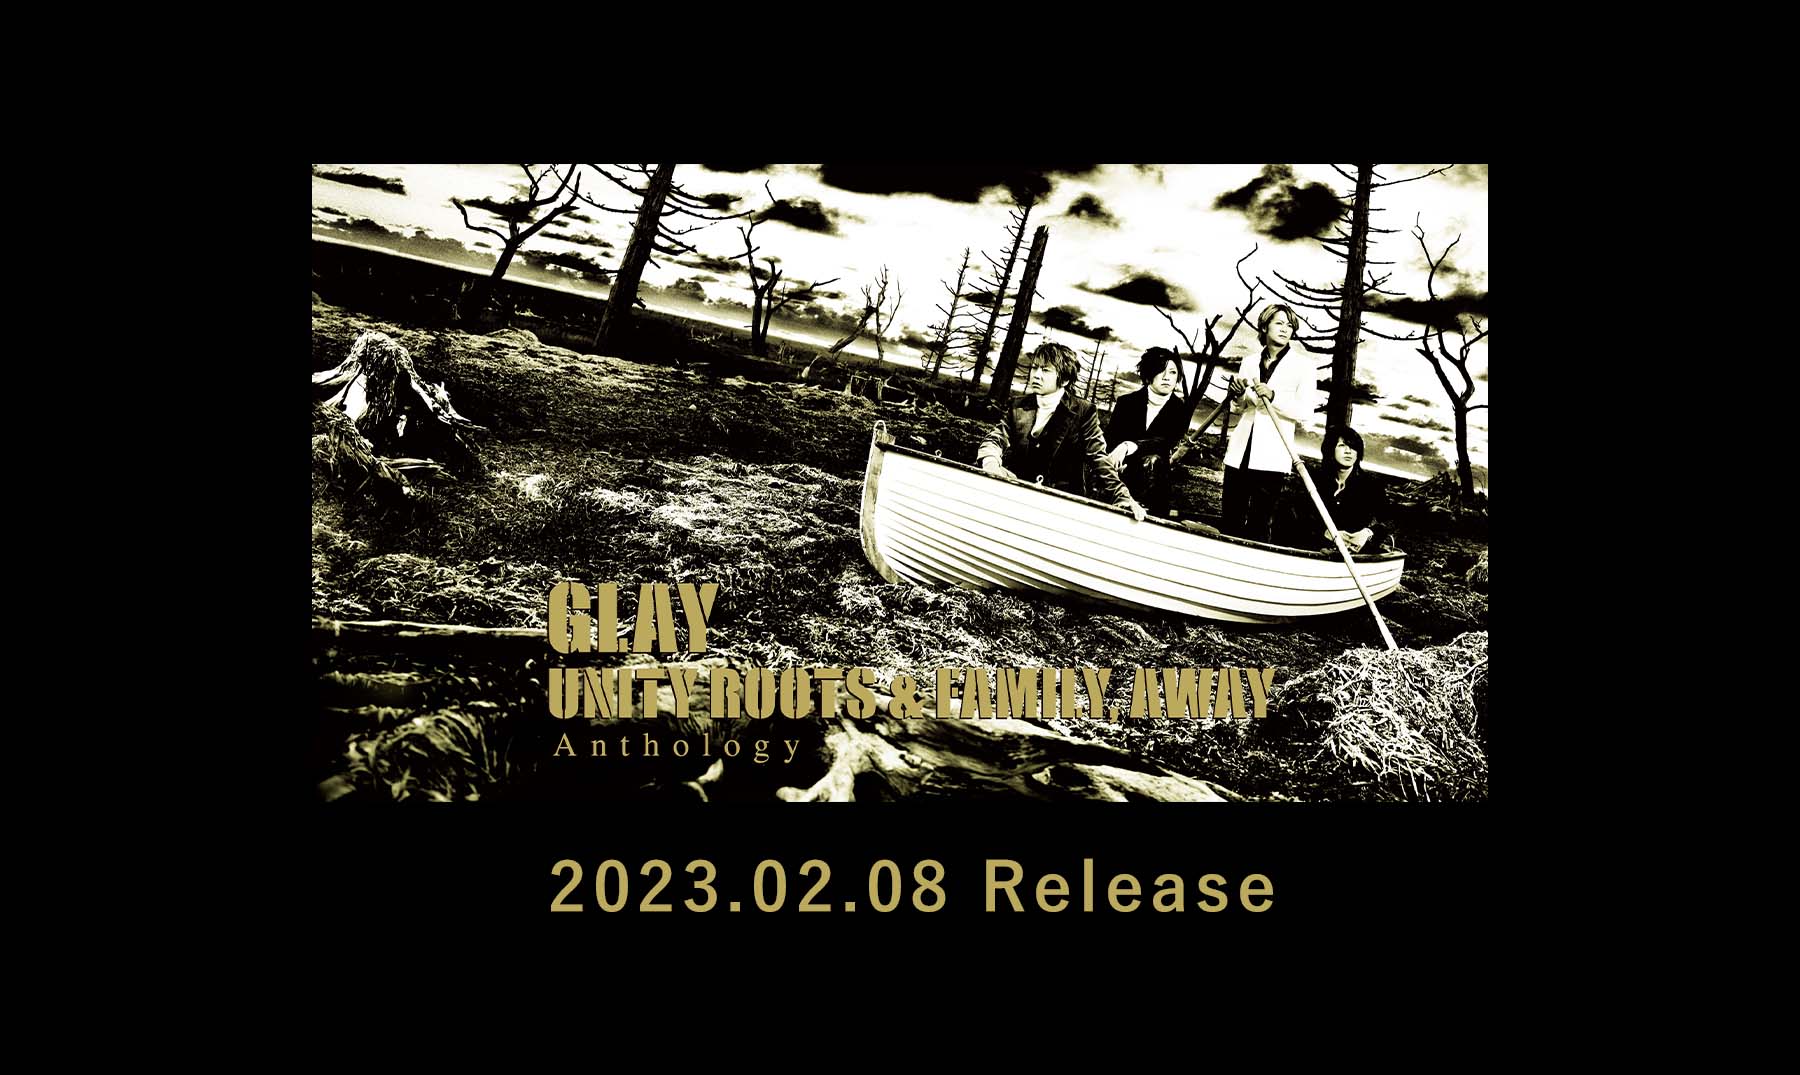 UNITY ROOTS & FAMILY, AWAY Anthology特設サイト